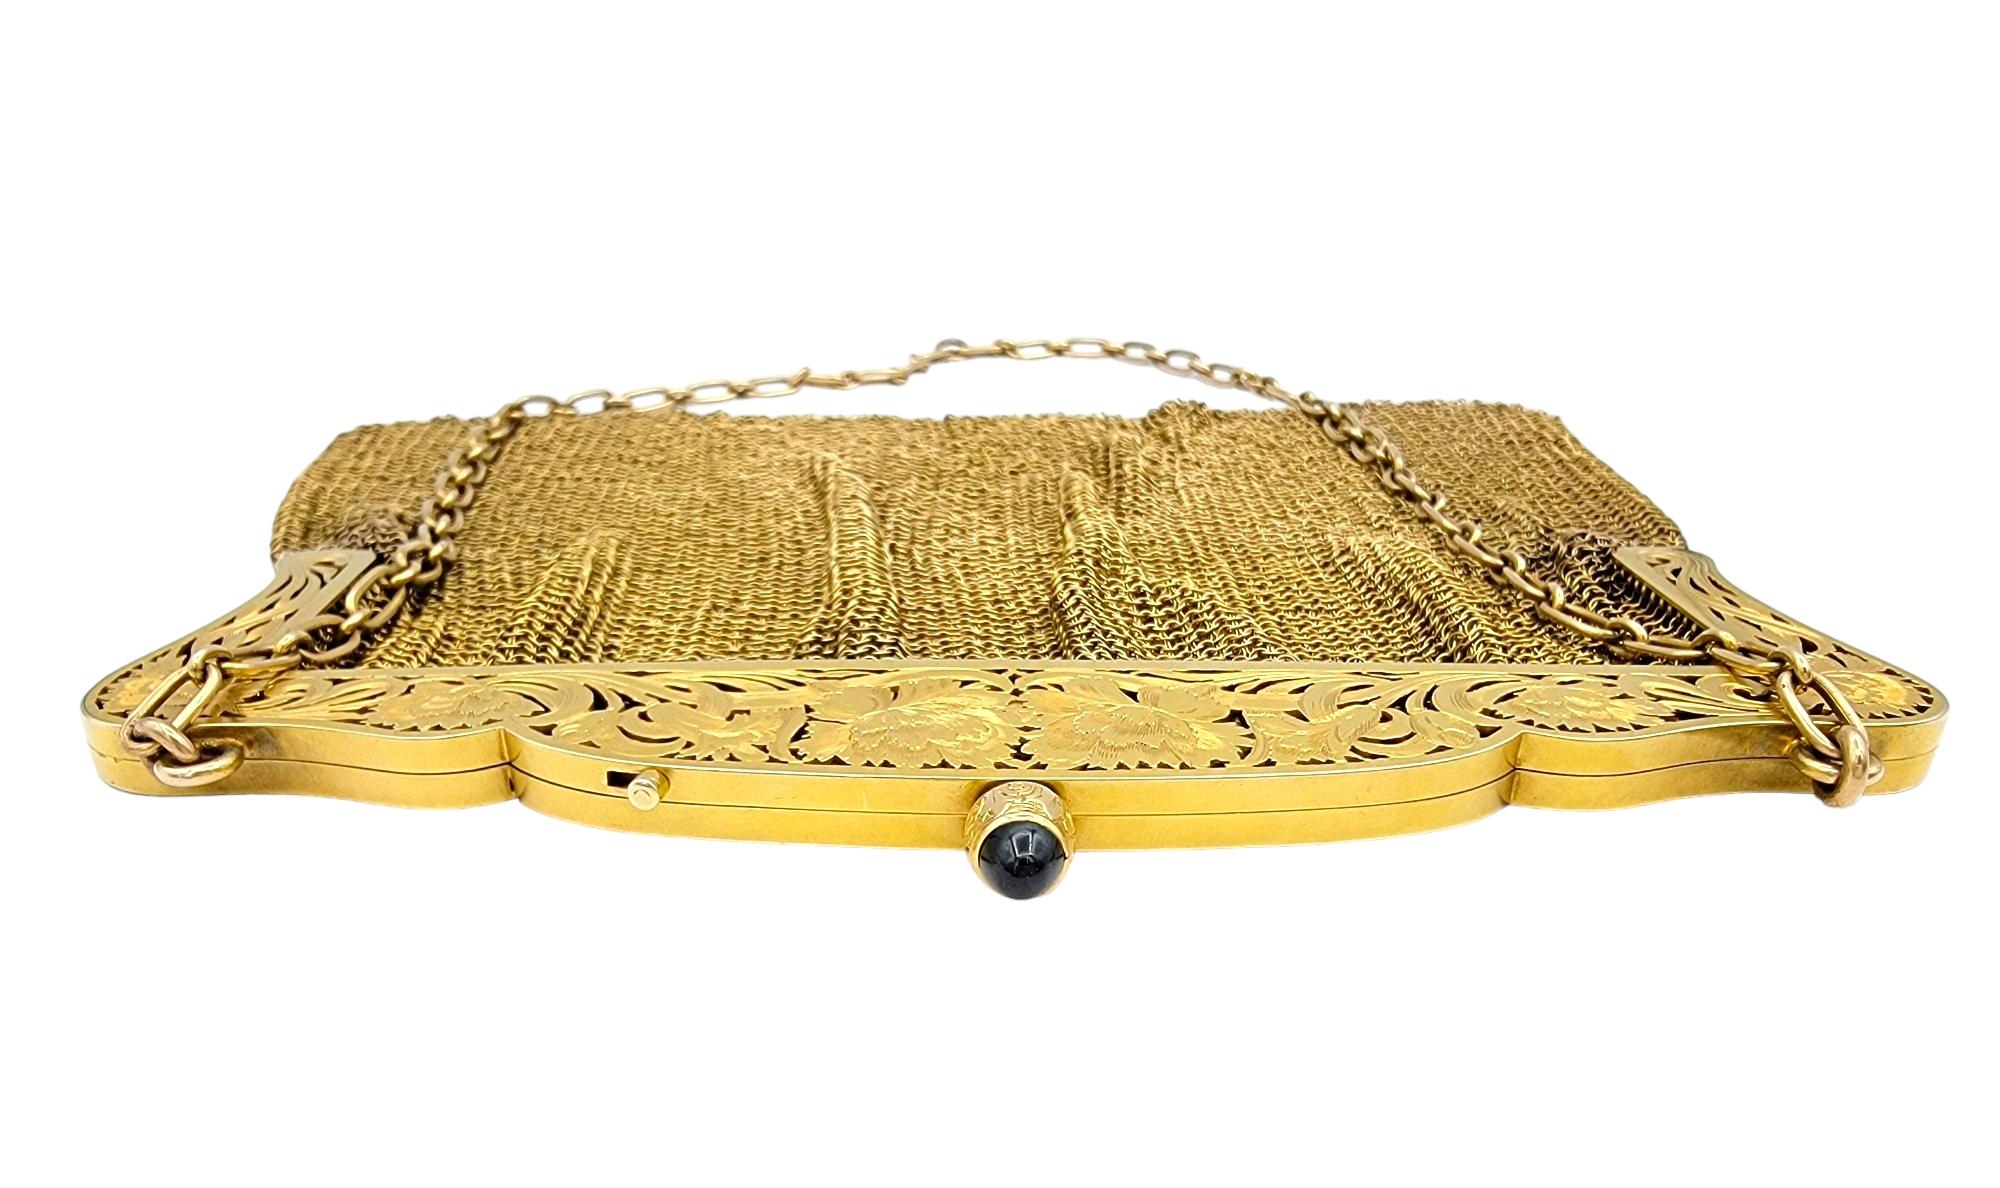 Vintage Art Deco 14 Karat Gold Mesh Purse with Chain and Sapphire Cabochon Clasp For Sale 3